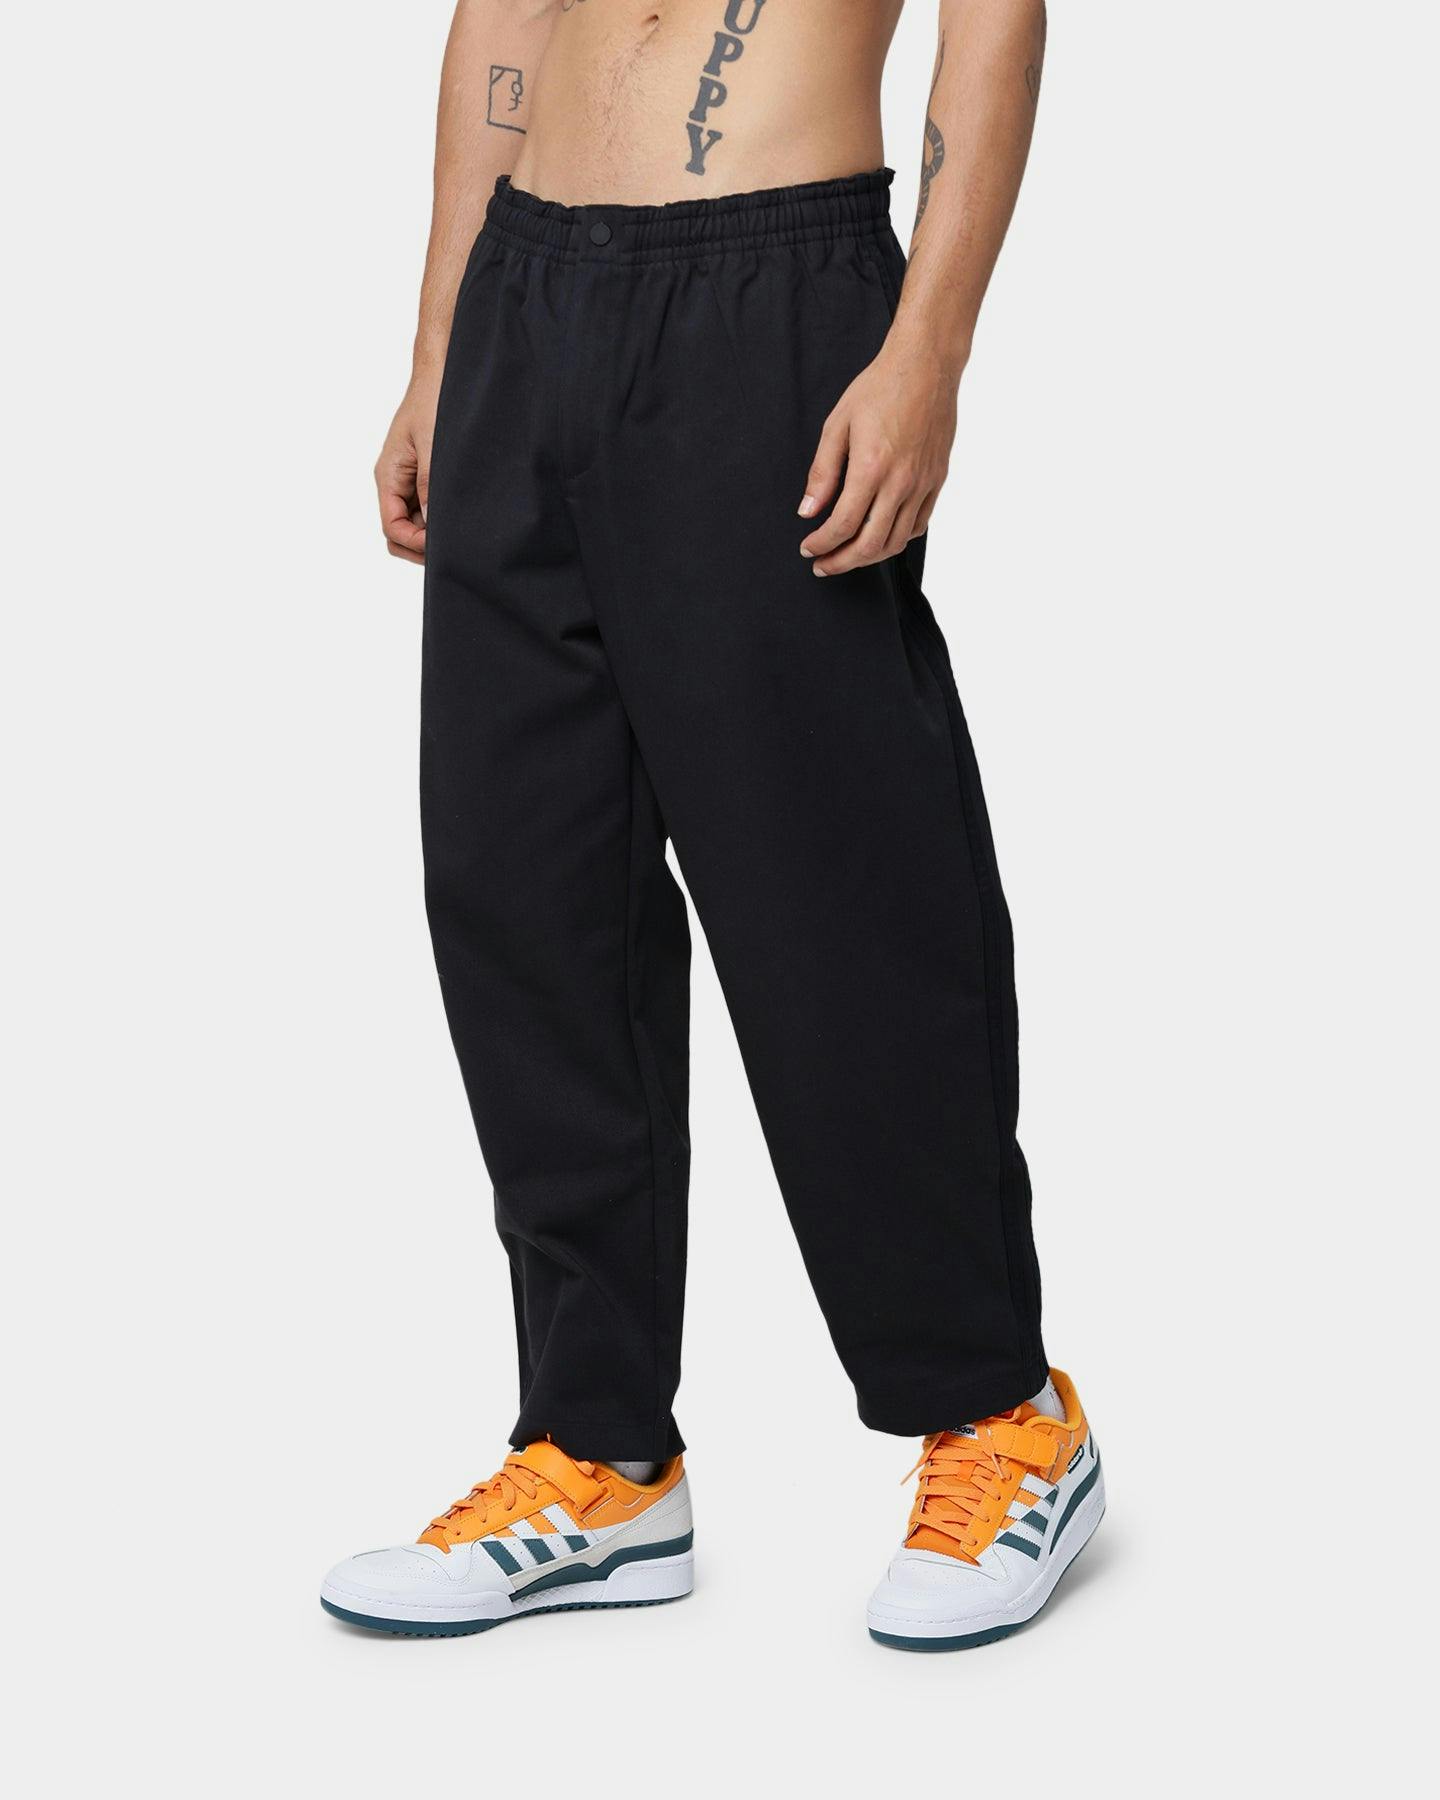 Adidas Cropped Twill Pant Black | Culture Kings NZ